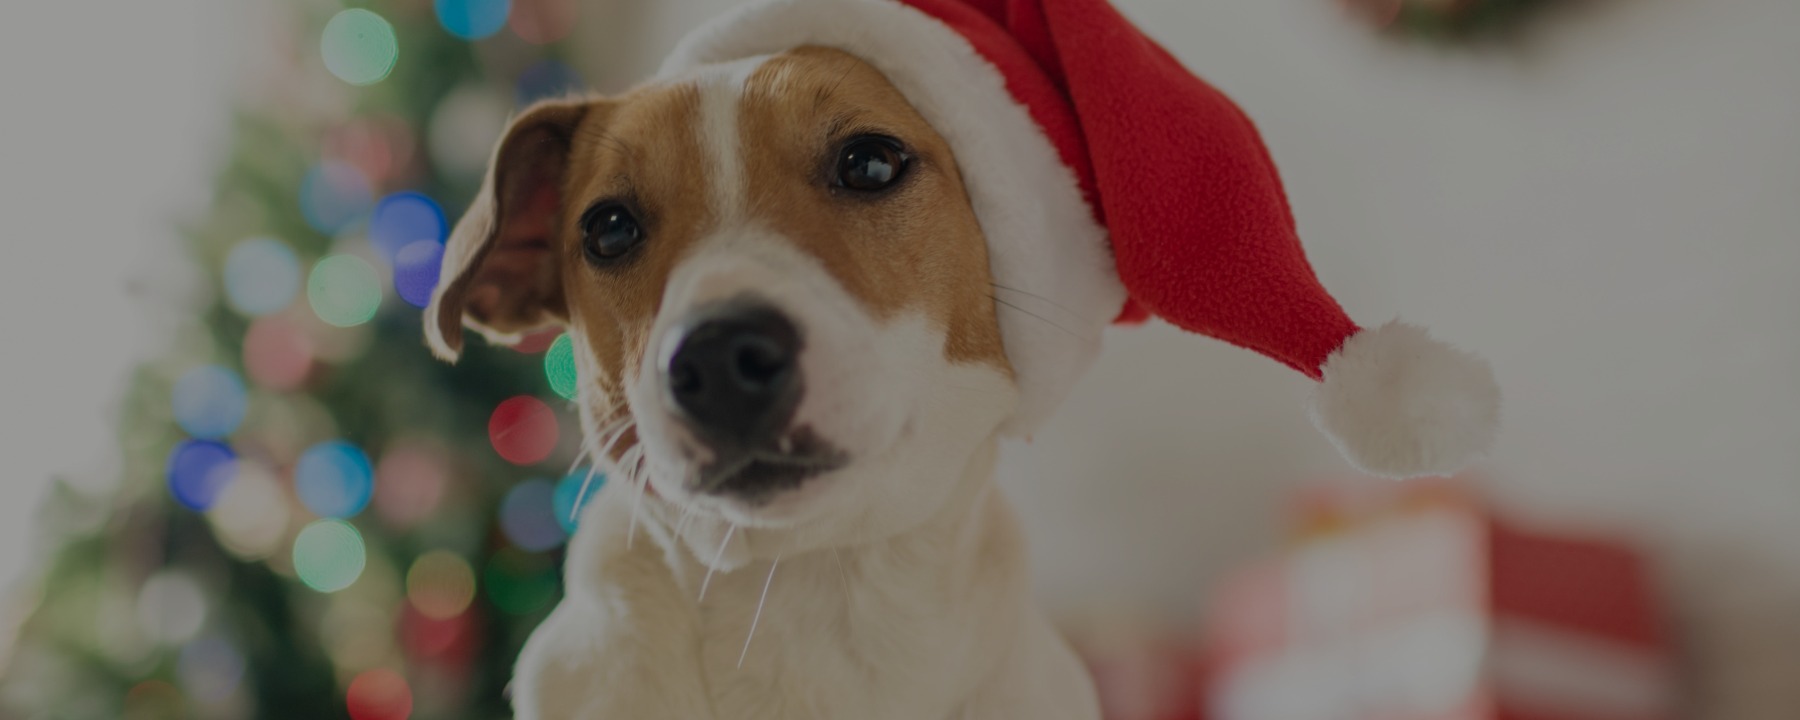 Holiday Gift Guide for Dog Lovers